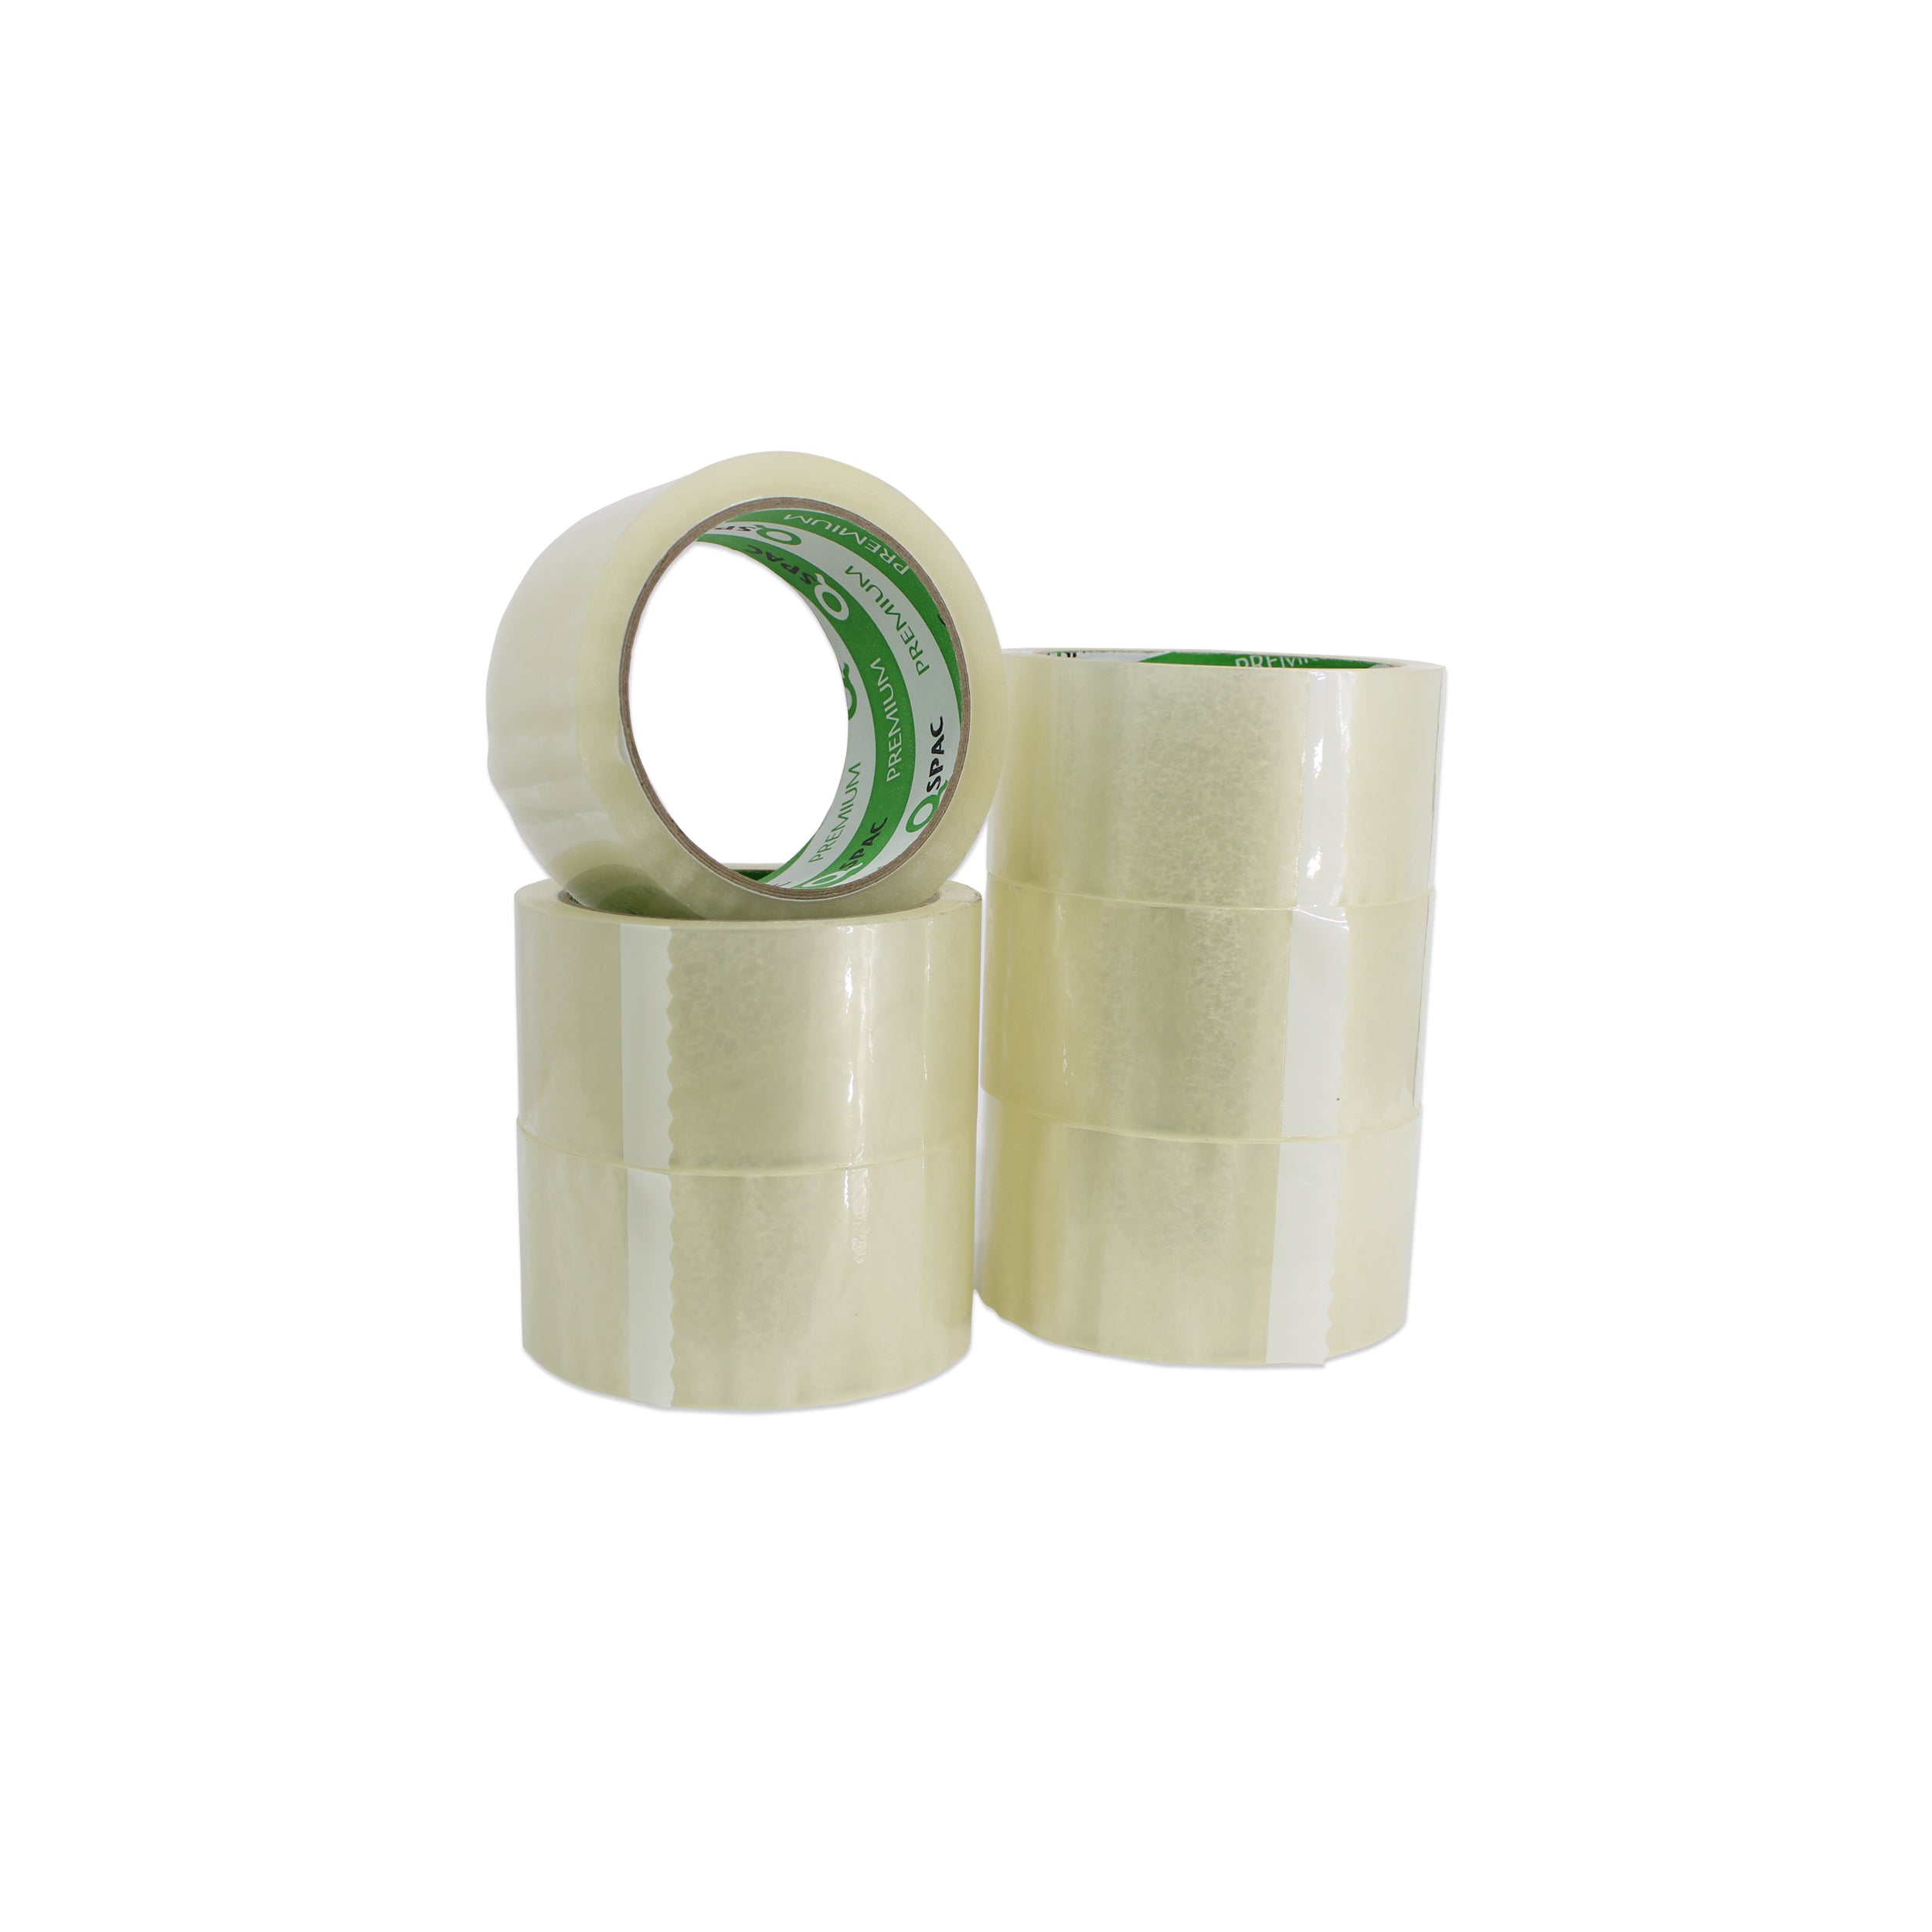 Packing Tape 2" x 55 Yard - Pack of 6